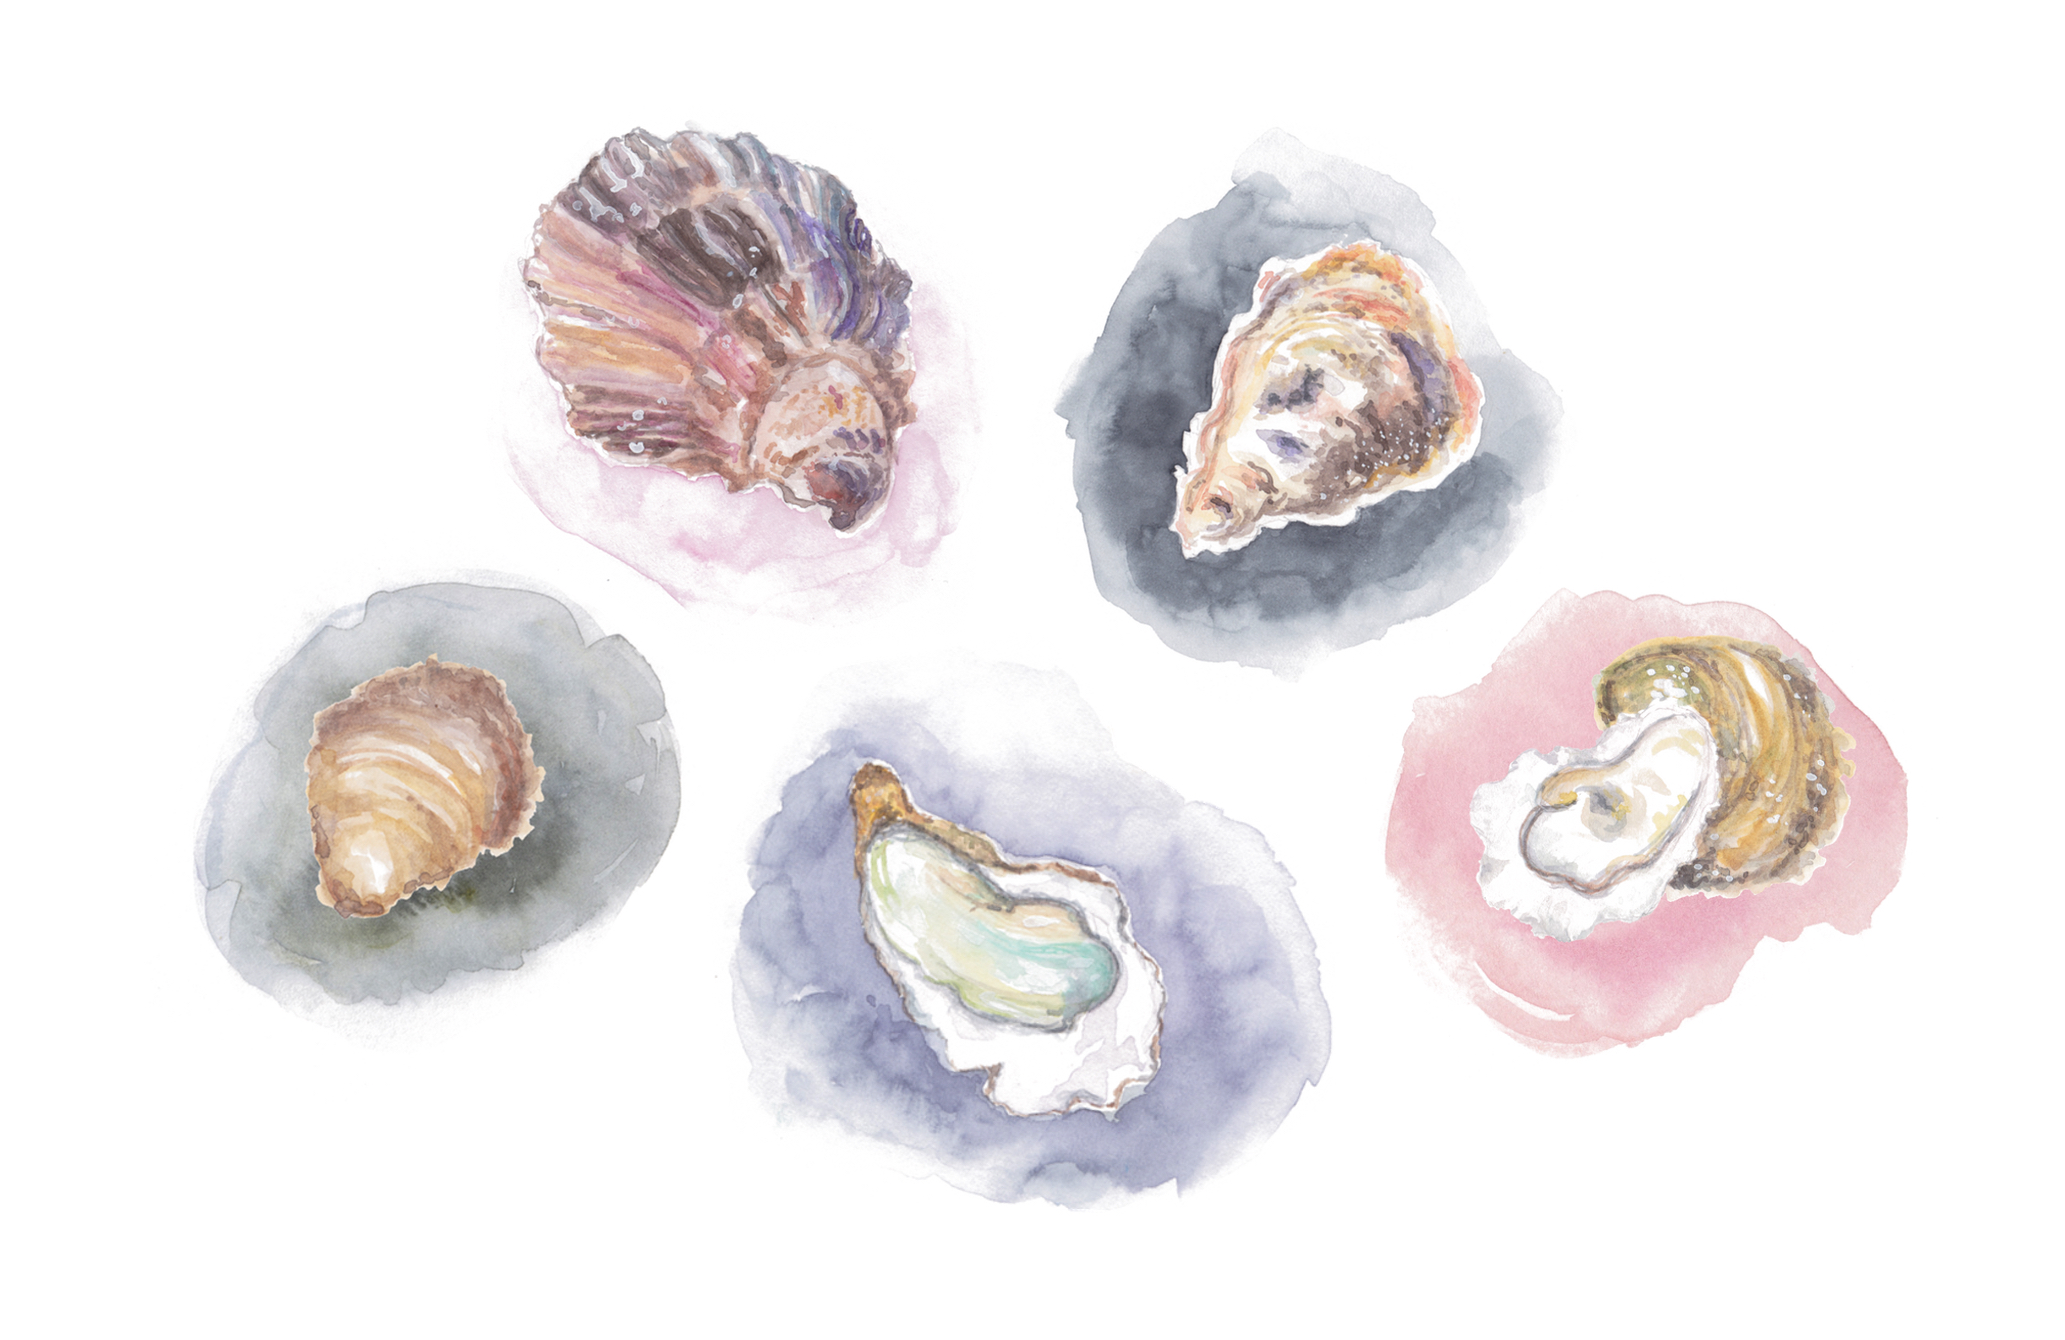 The five different types of oysters available in New York.